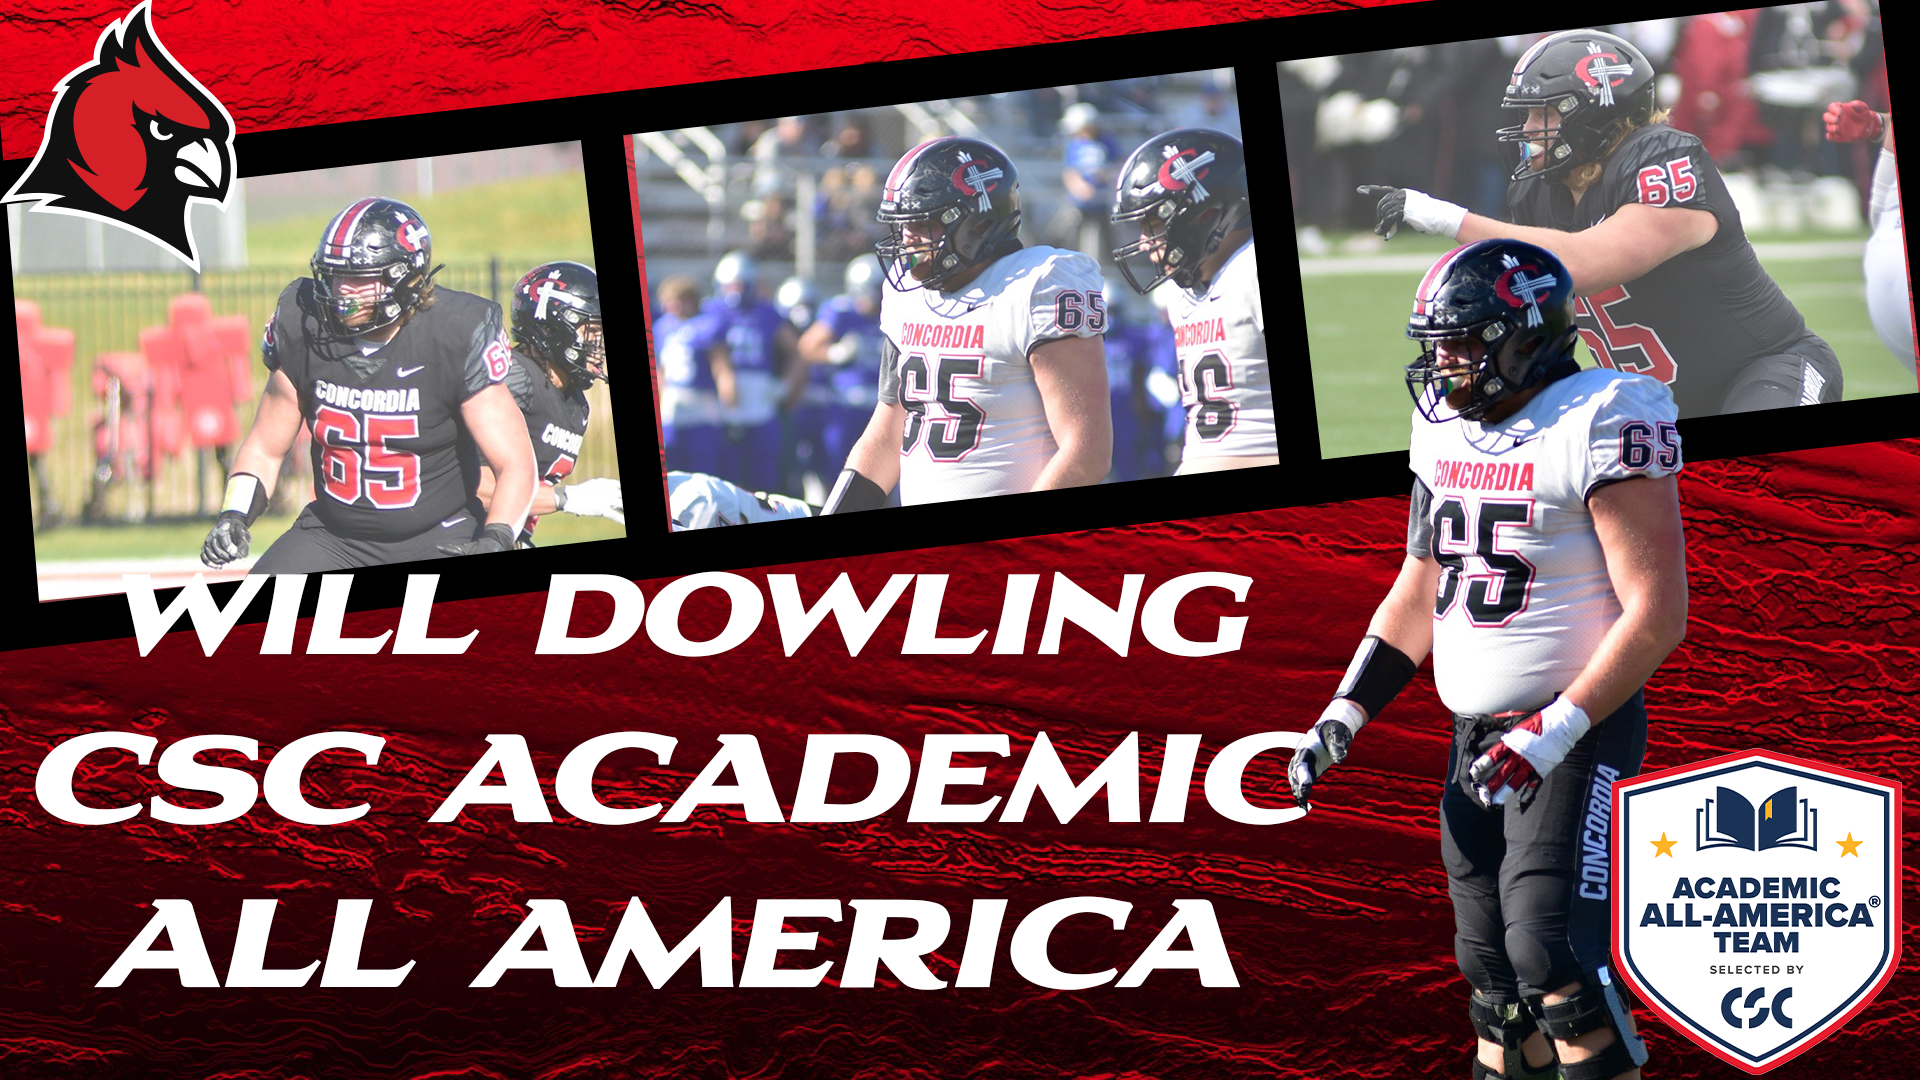 Will Dowling named to the CSC All-America team